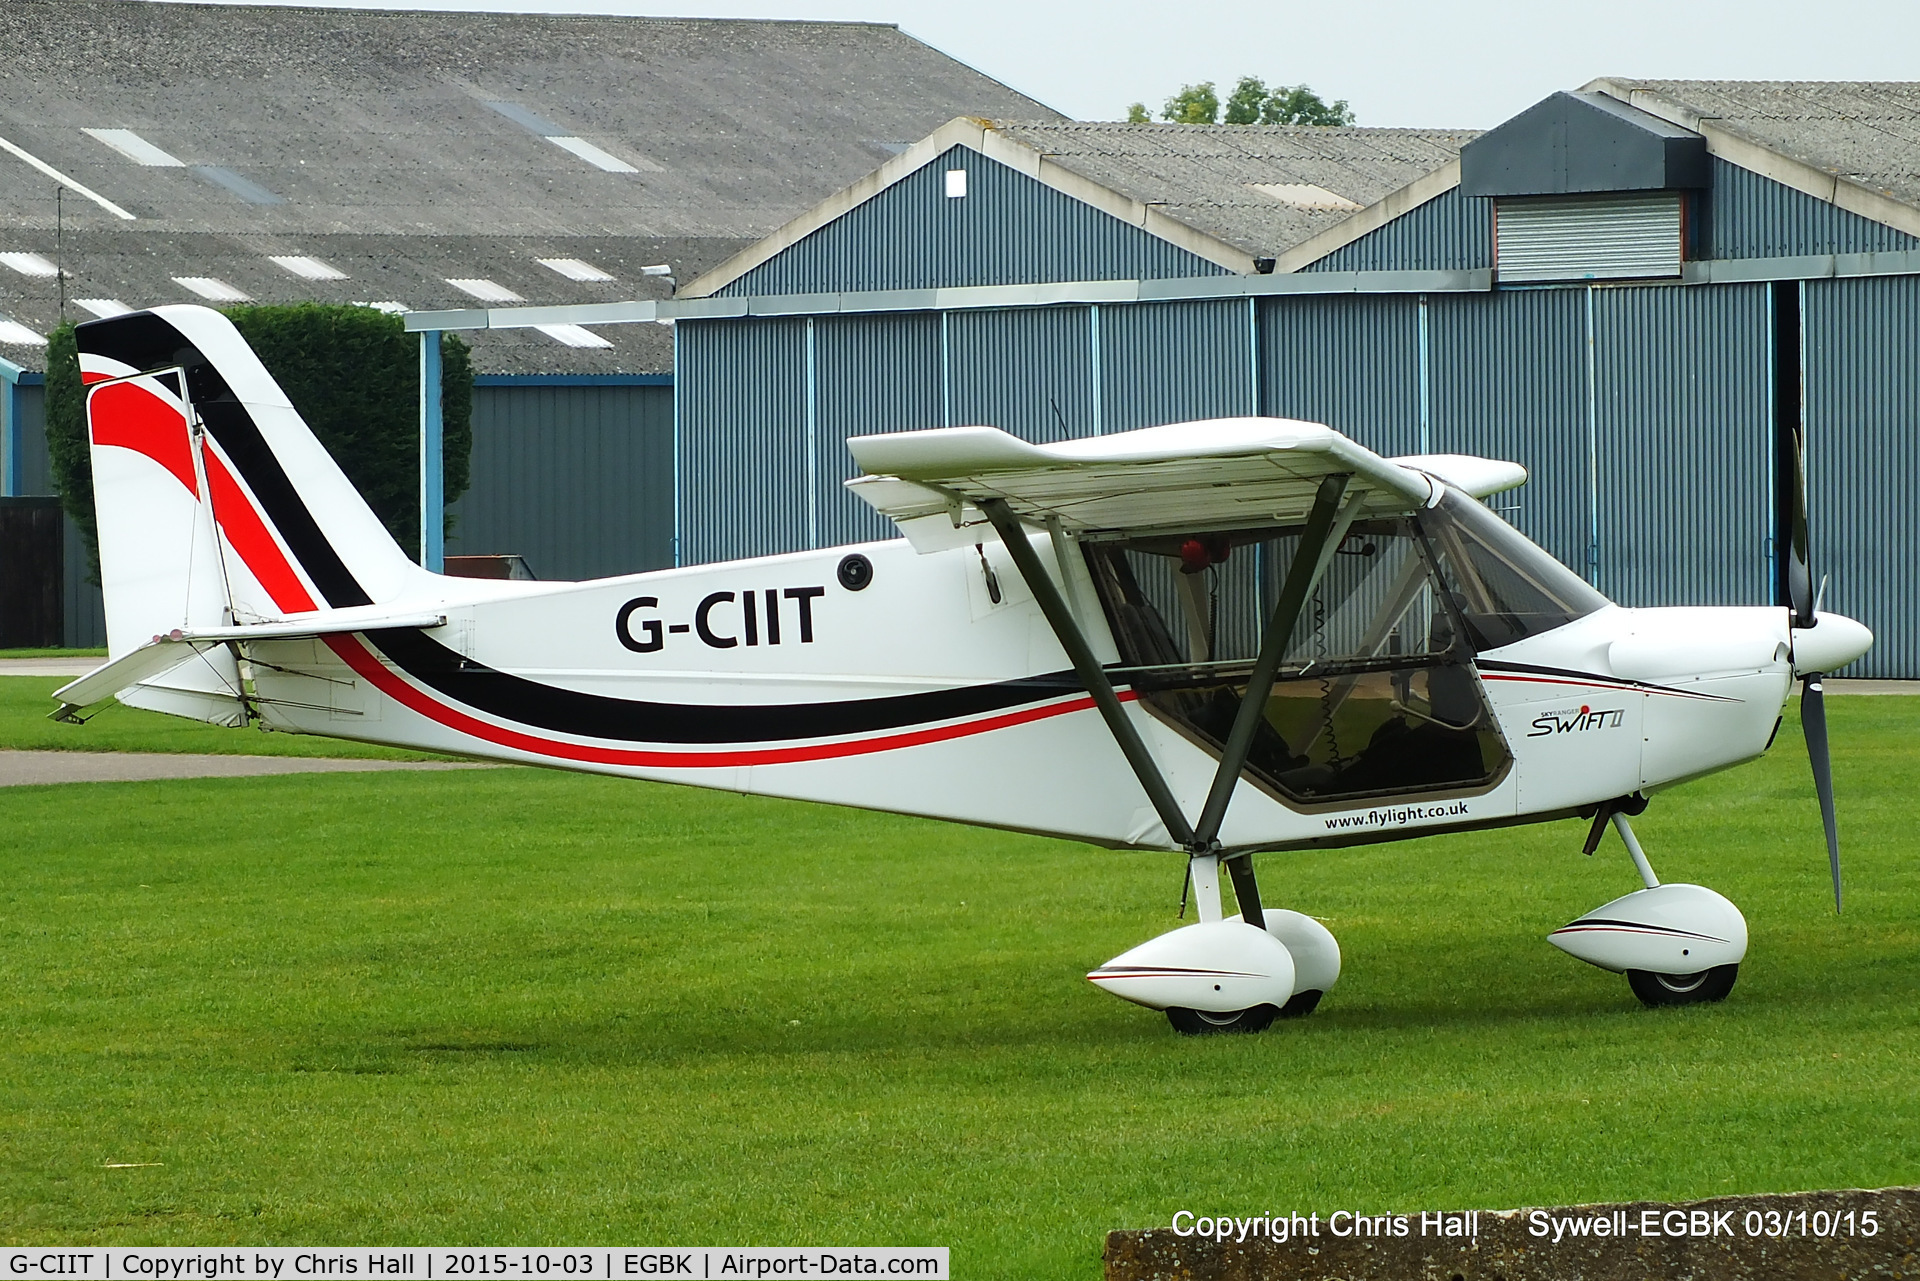 G-CIIT, 2014 Best Off SkyRanger Swift 912(1) C/N BMAA/HB/644, at The Radial And Training Aircraft Fly-in